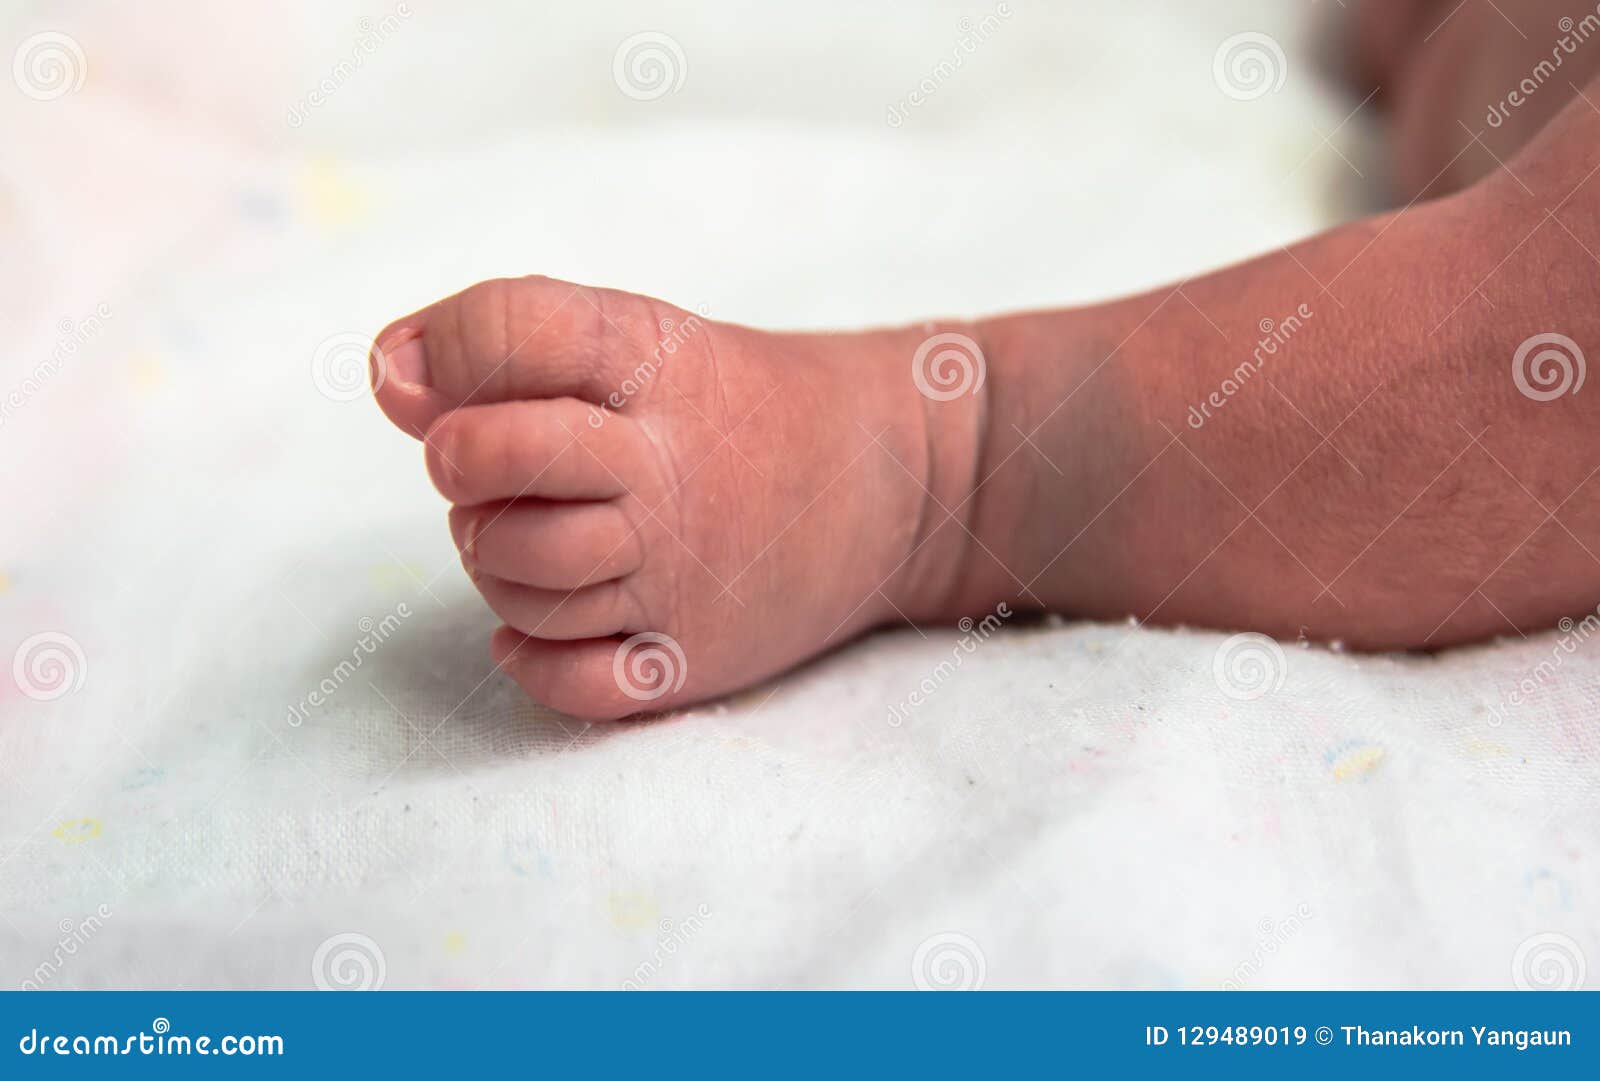 cutes foot of newborn baby in postpartum care unit in hospital when she sleeping with her mother .